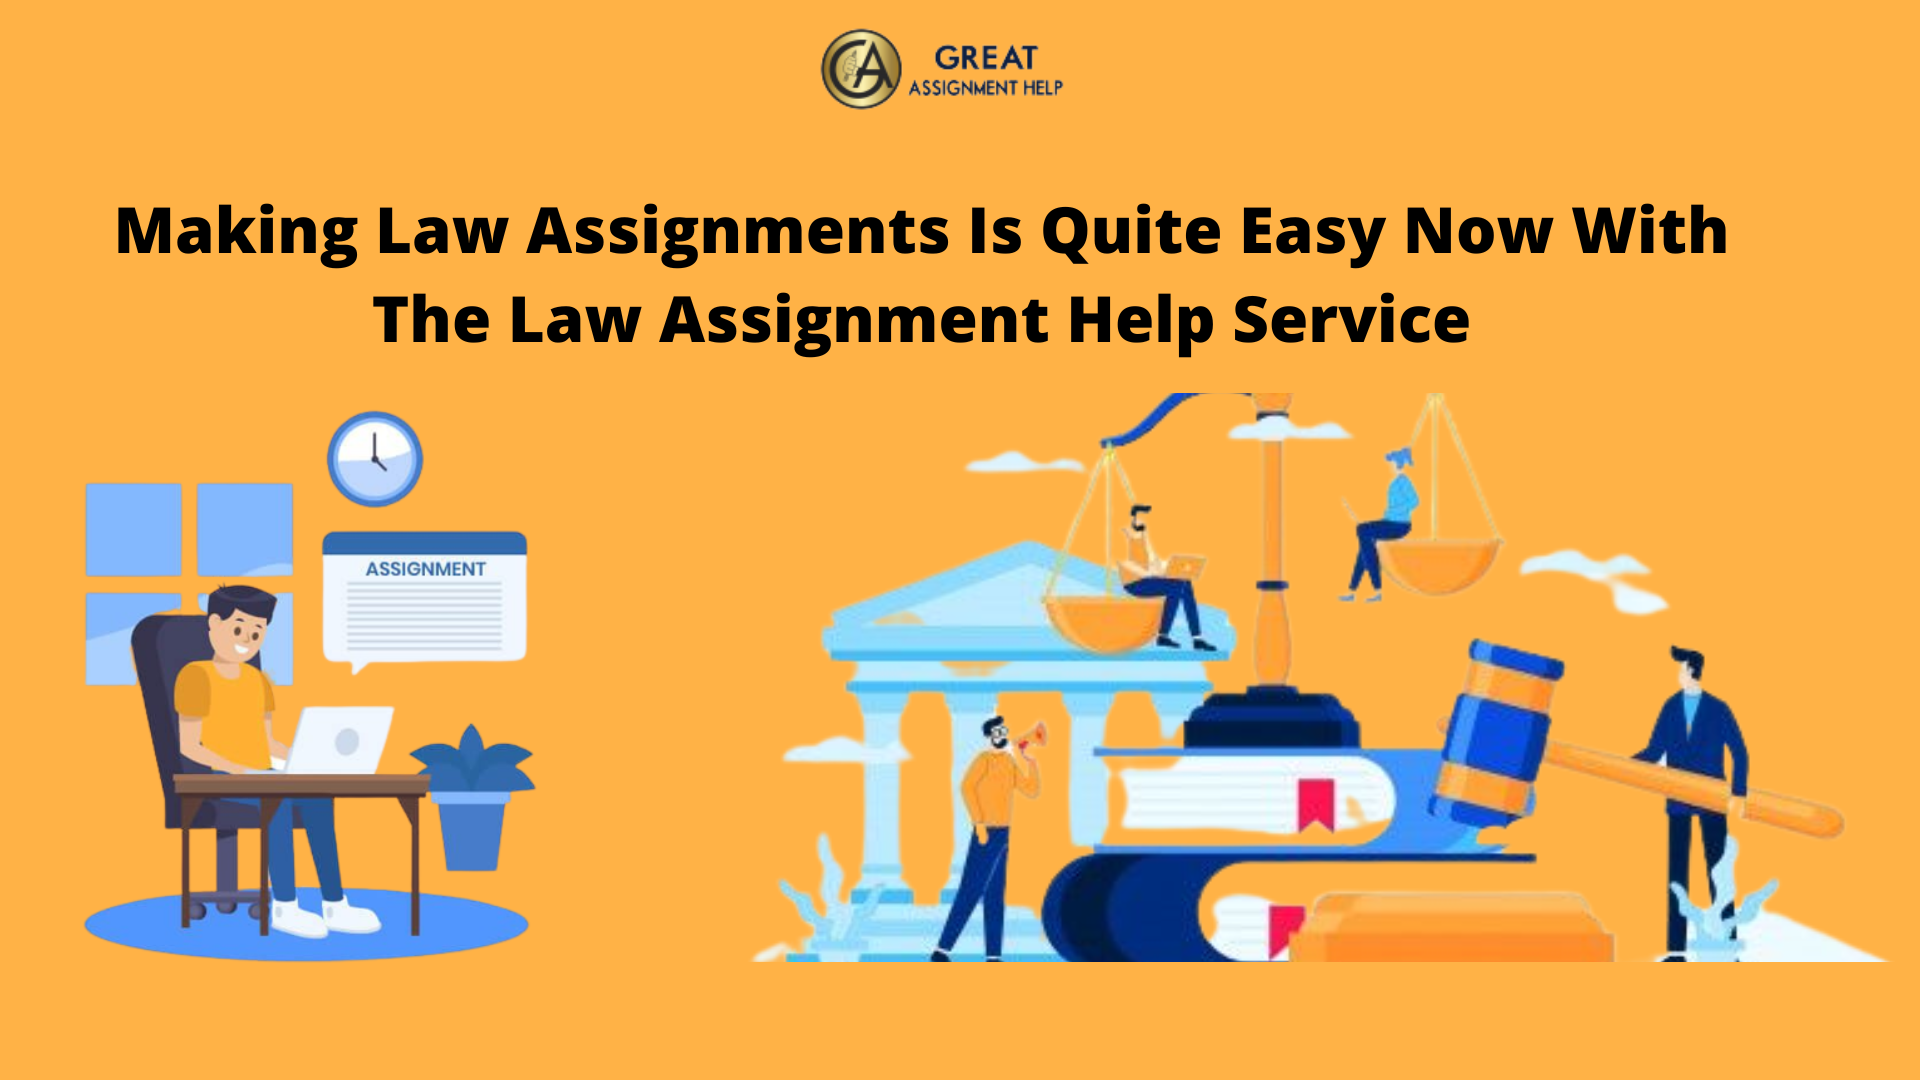 Making Assignments is Easy Now With Law Assignment Help Service